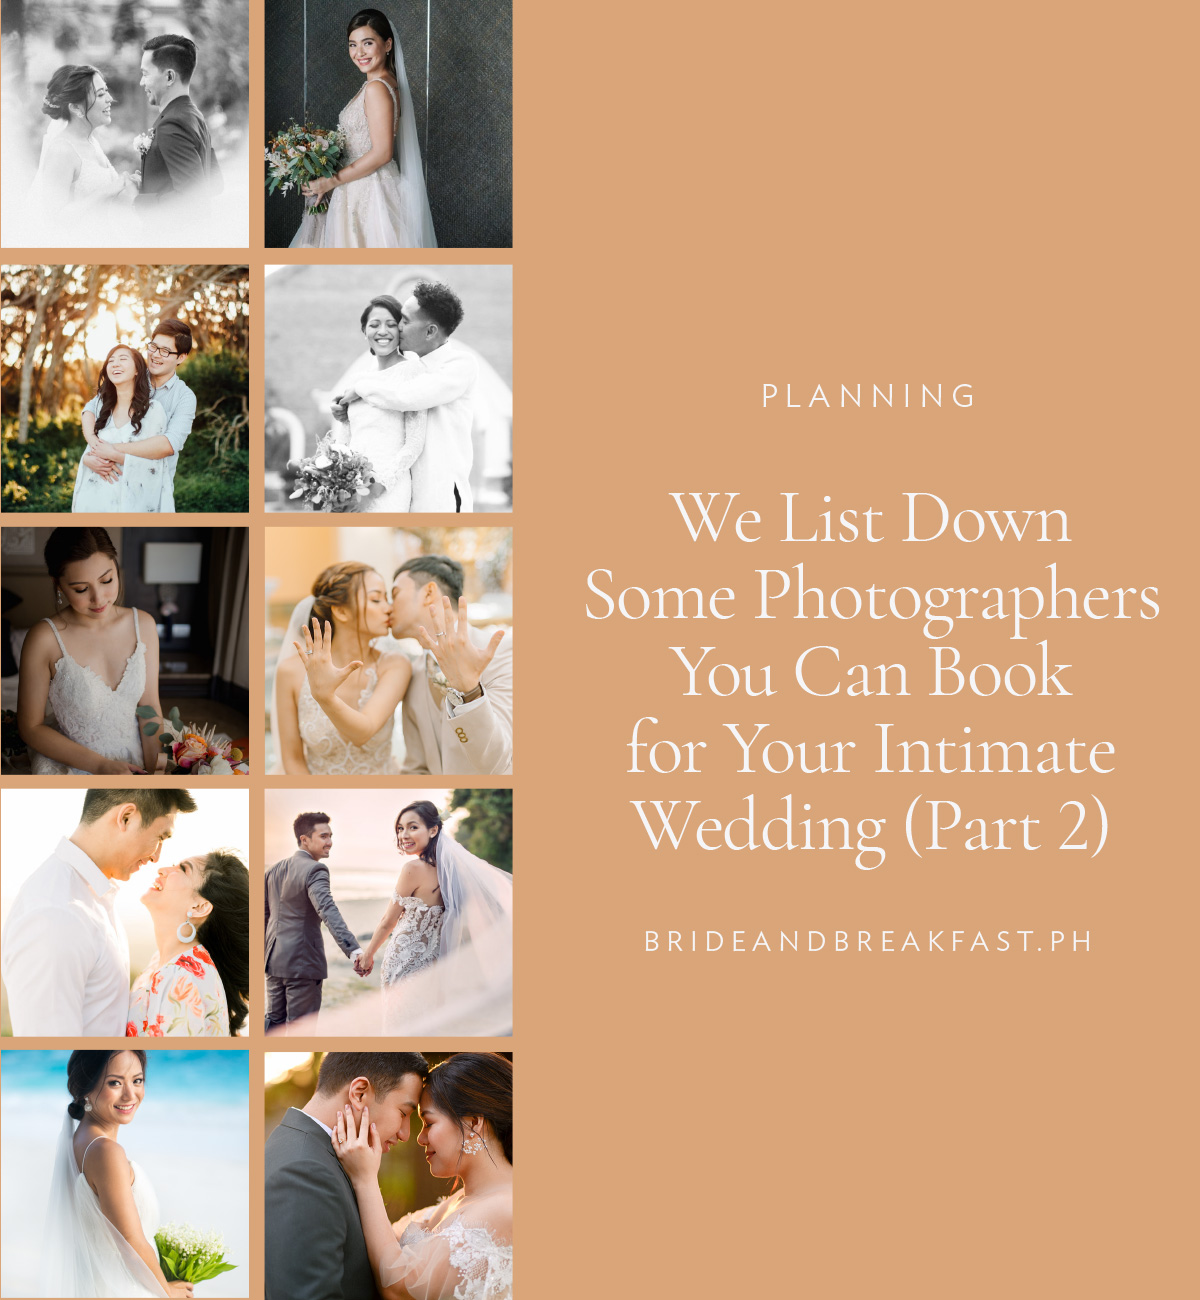 We List Down some Photographers You Can Book for Your Intimate Wedding (Part 2)